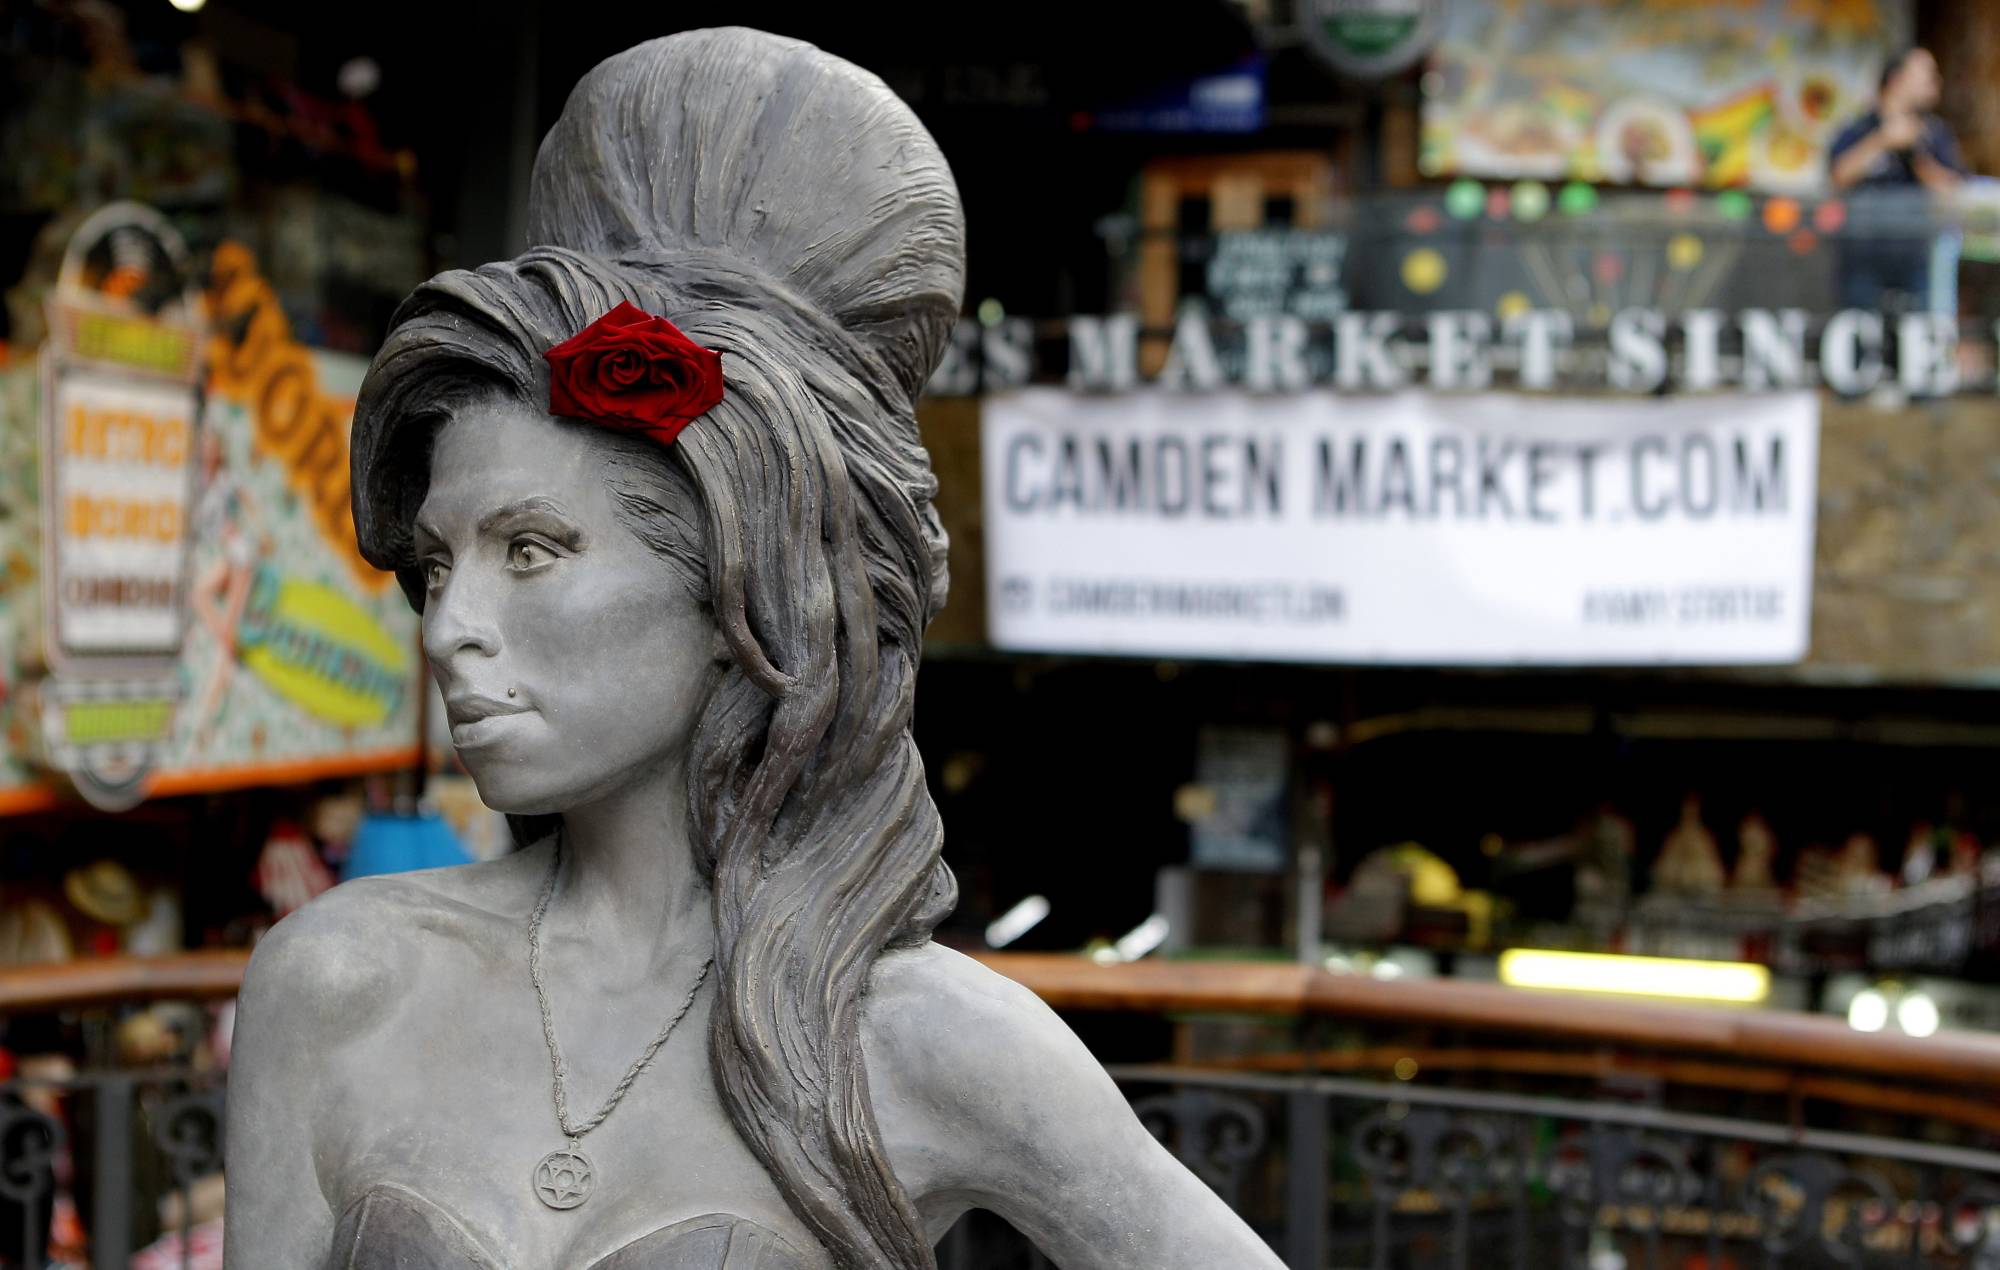 Star of David necklace on Amy Winehouse statue in Camden covered by Palestine sticker